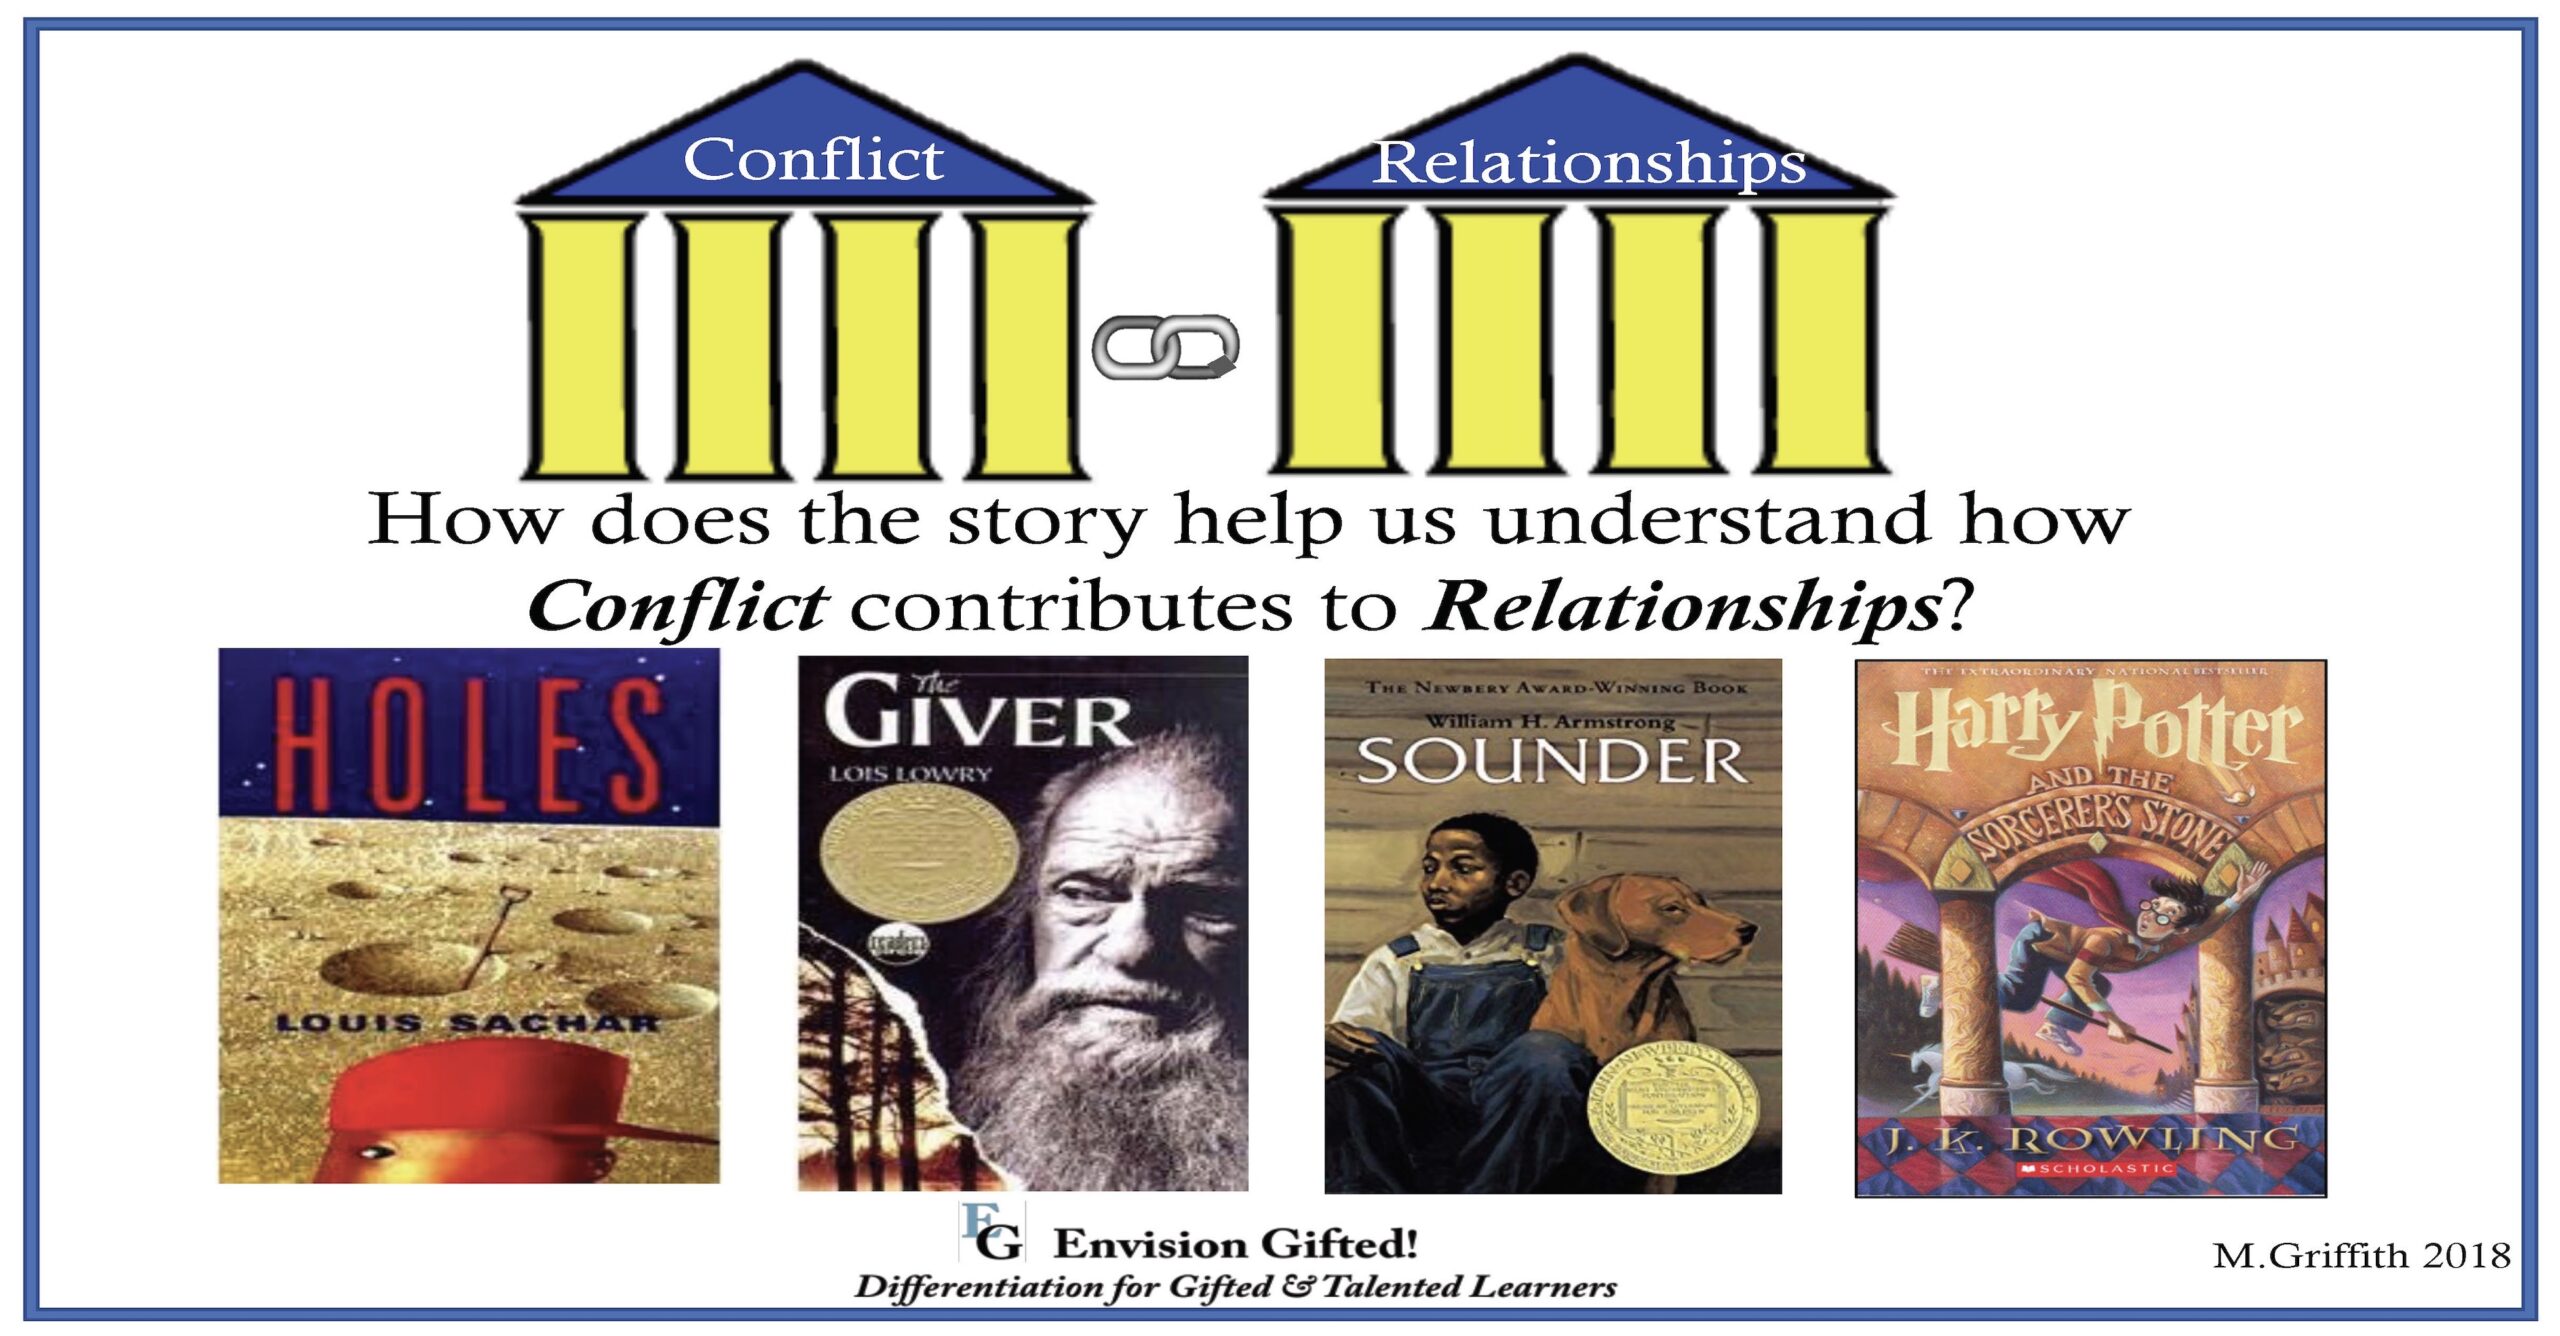 Envision Gifted. Universal Theme- Conflict contributes to Relationships